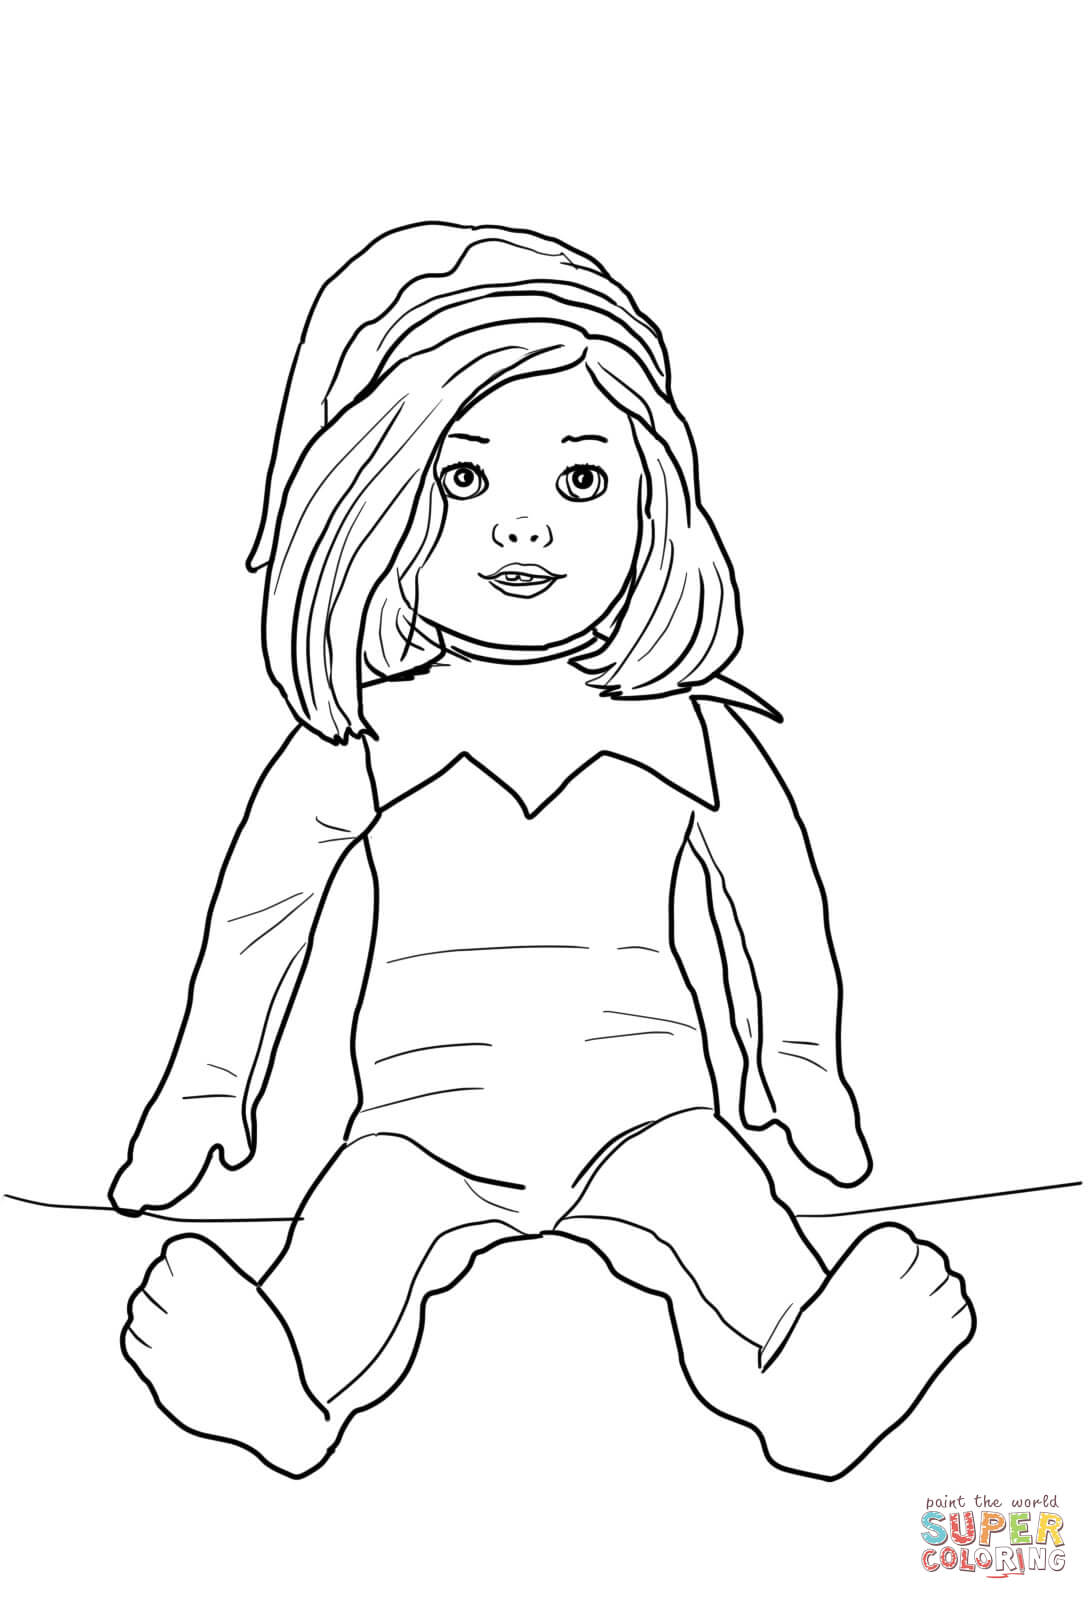 free-elf-on-the-shelf-coloring-pages-to-print-download-free-elf-on-the